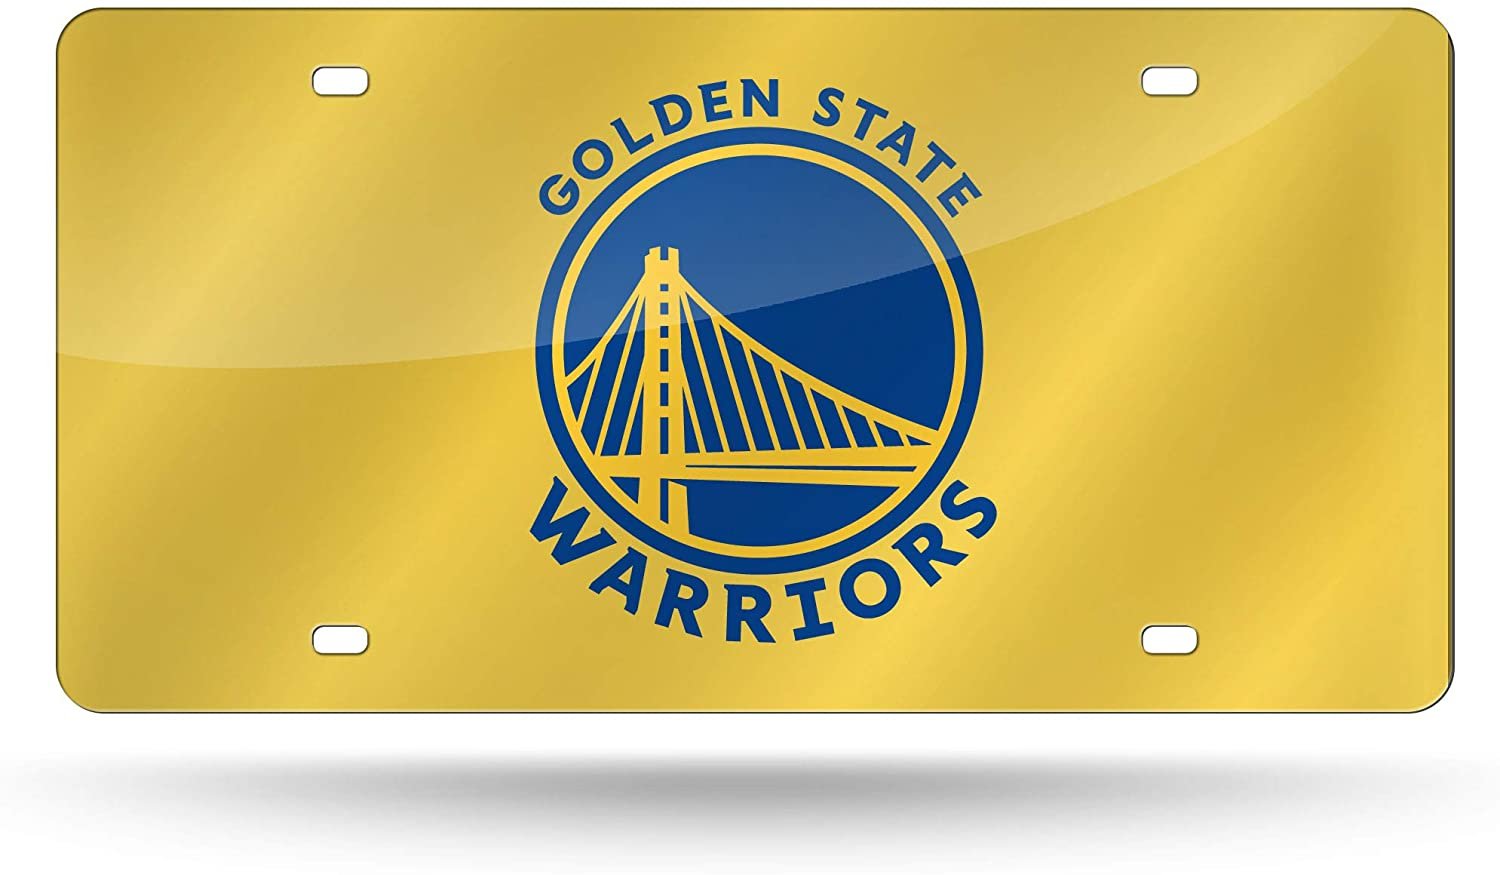 Golden State Warriors Premium Laser Cut Tag License Plate, Yellow Mirrored Acrylic Inlaid, 12x6 Inch